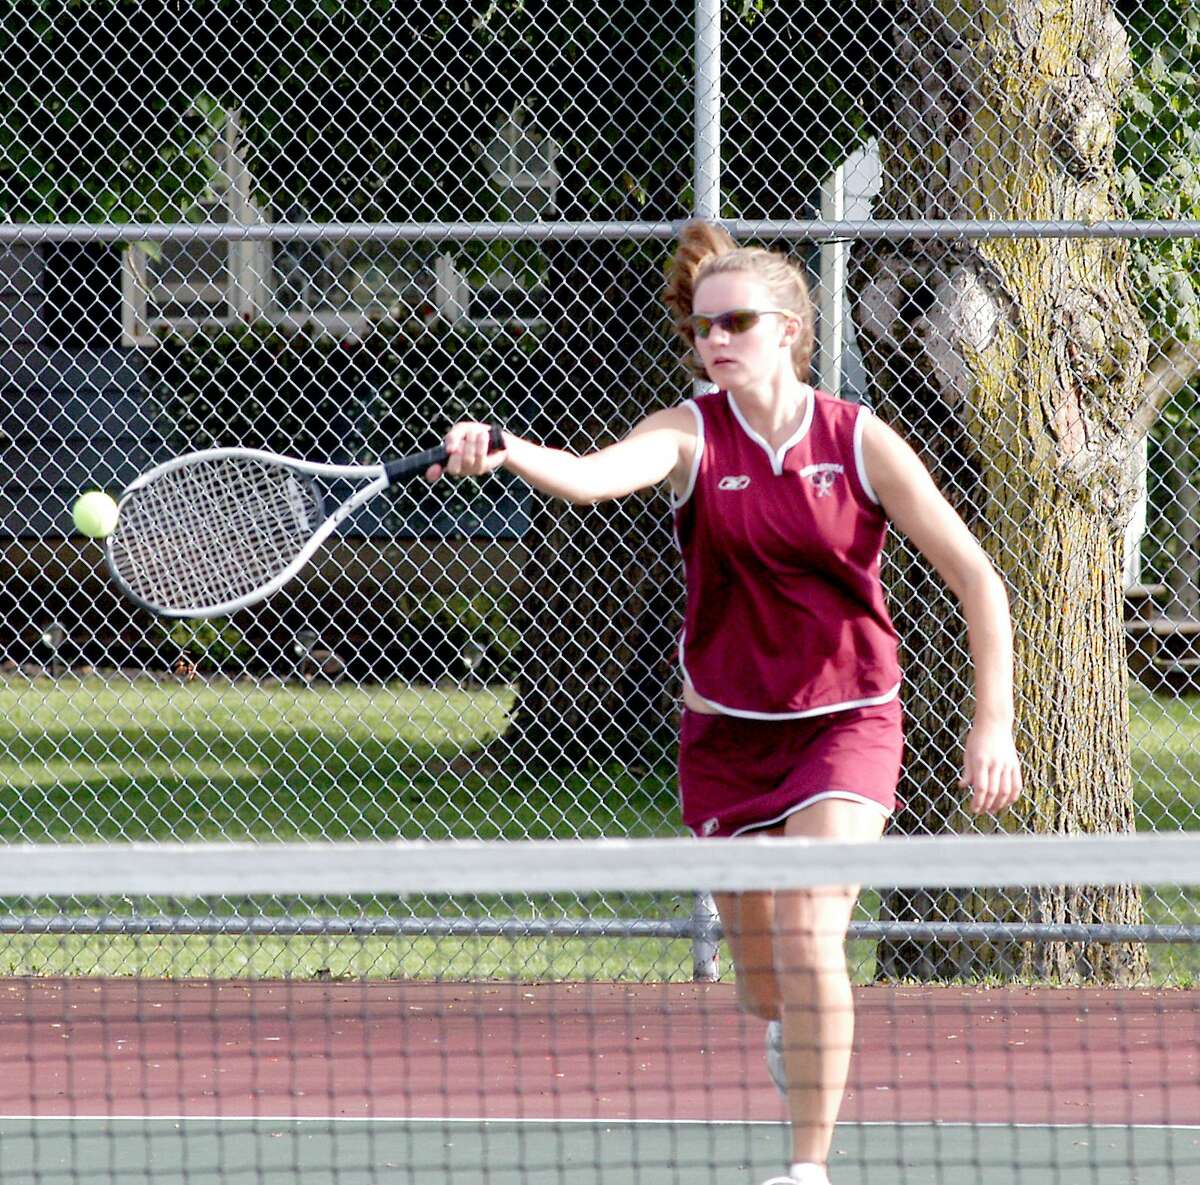 Dispatch Staff Photo by DAVID M. JOHNSONCanastota's Tracy O'Hern returns a shot from Waterville's Megan Eastman in a first singles match Monday, September 19, 2011 in Canastota. O'Hern won the match.